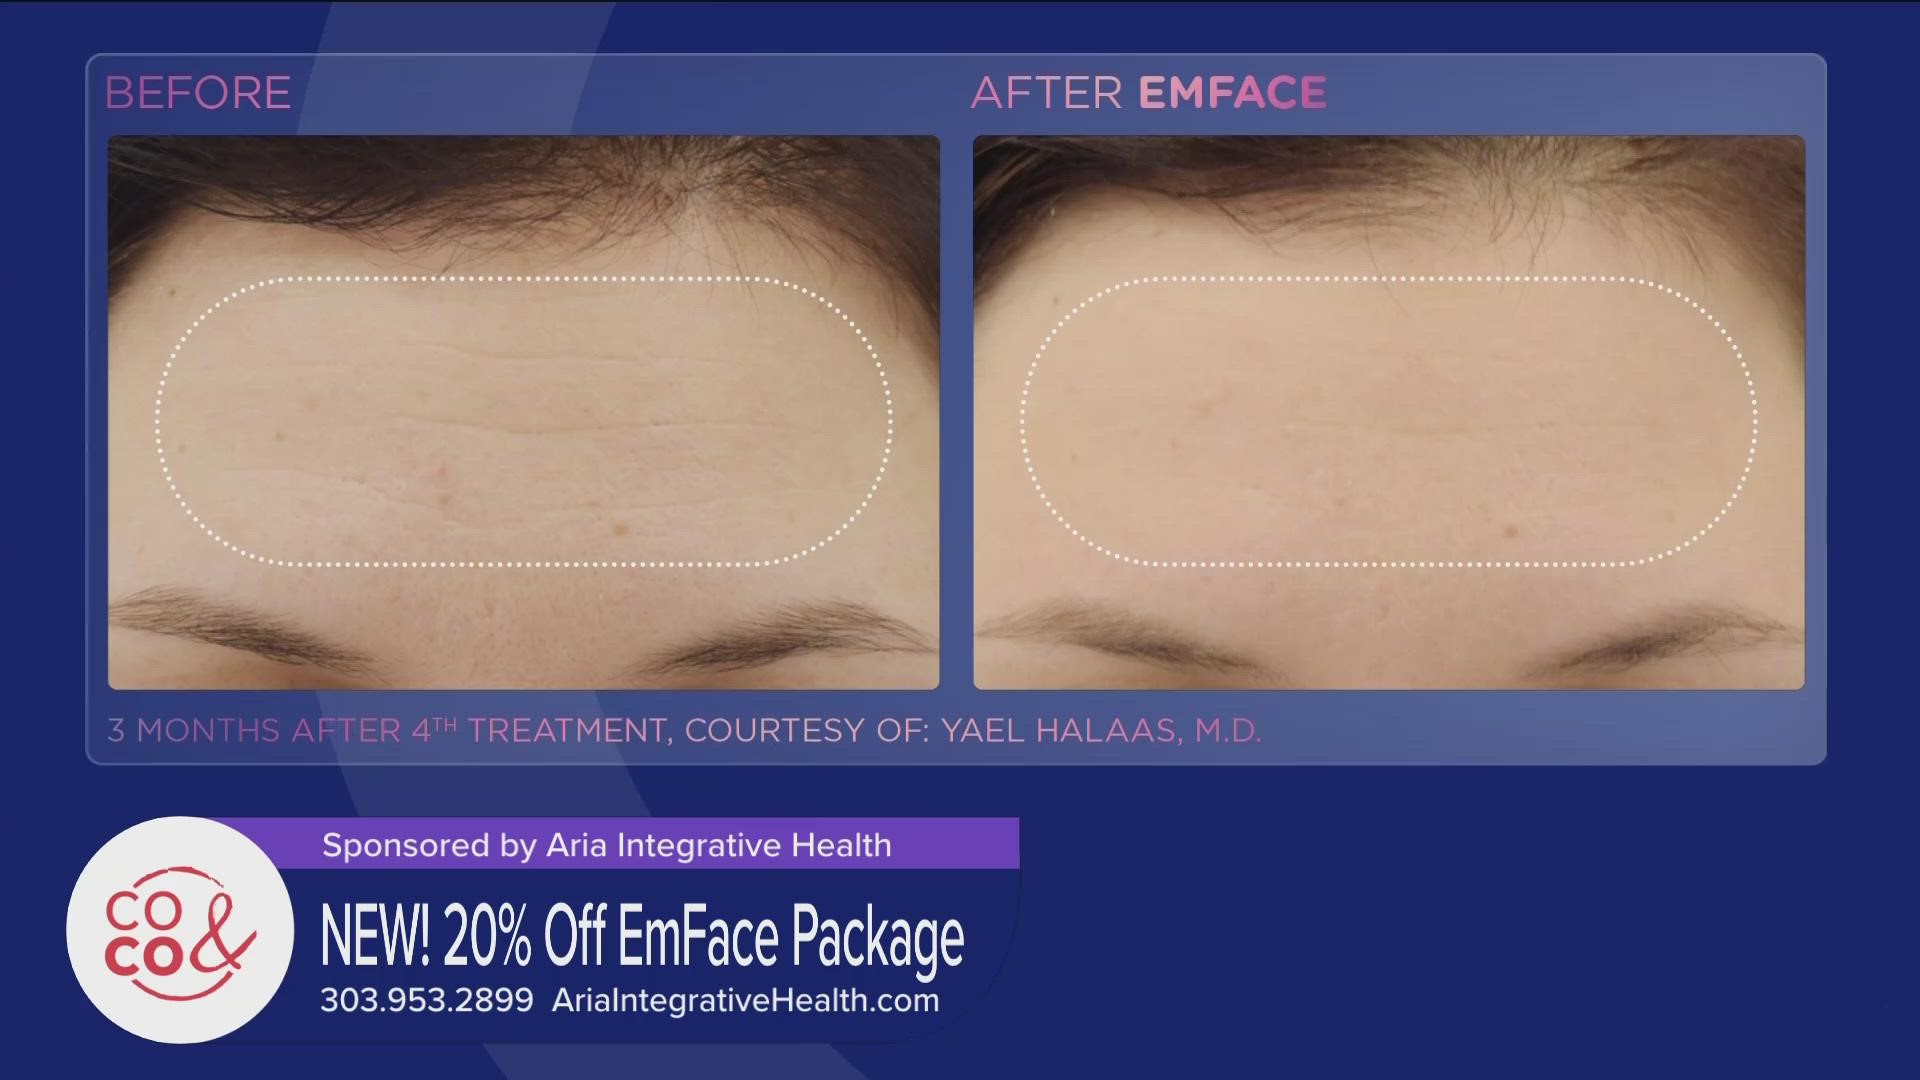 Call 303.953.2899 to get started with 20% off an EmFace Treatment Package and free consultation. Learn more at AriaIntegrativeHealth.com. **PAID CONTENT**